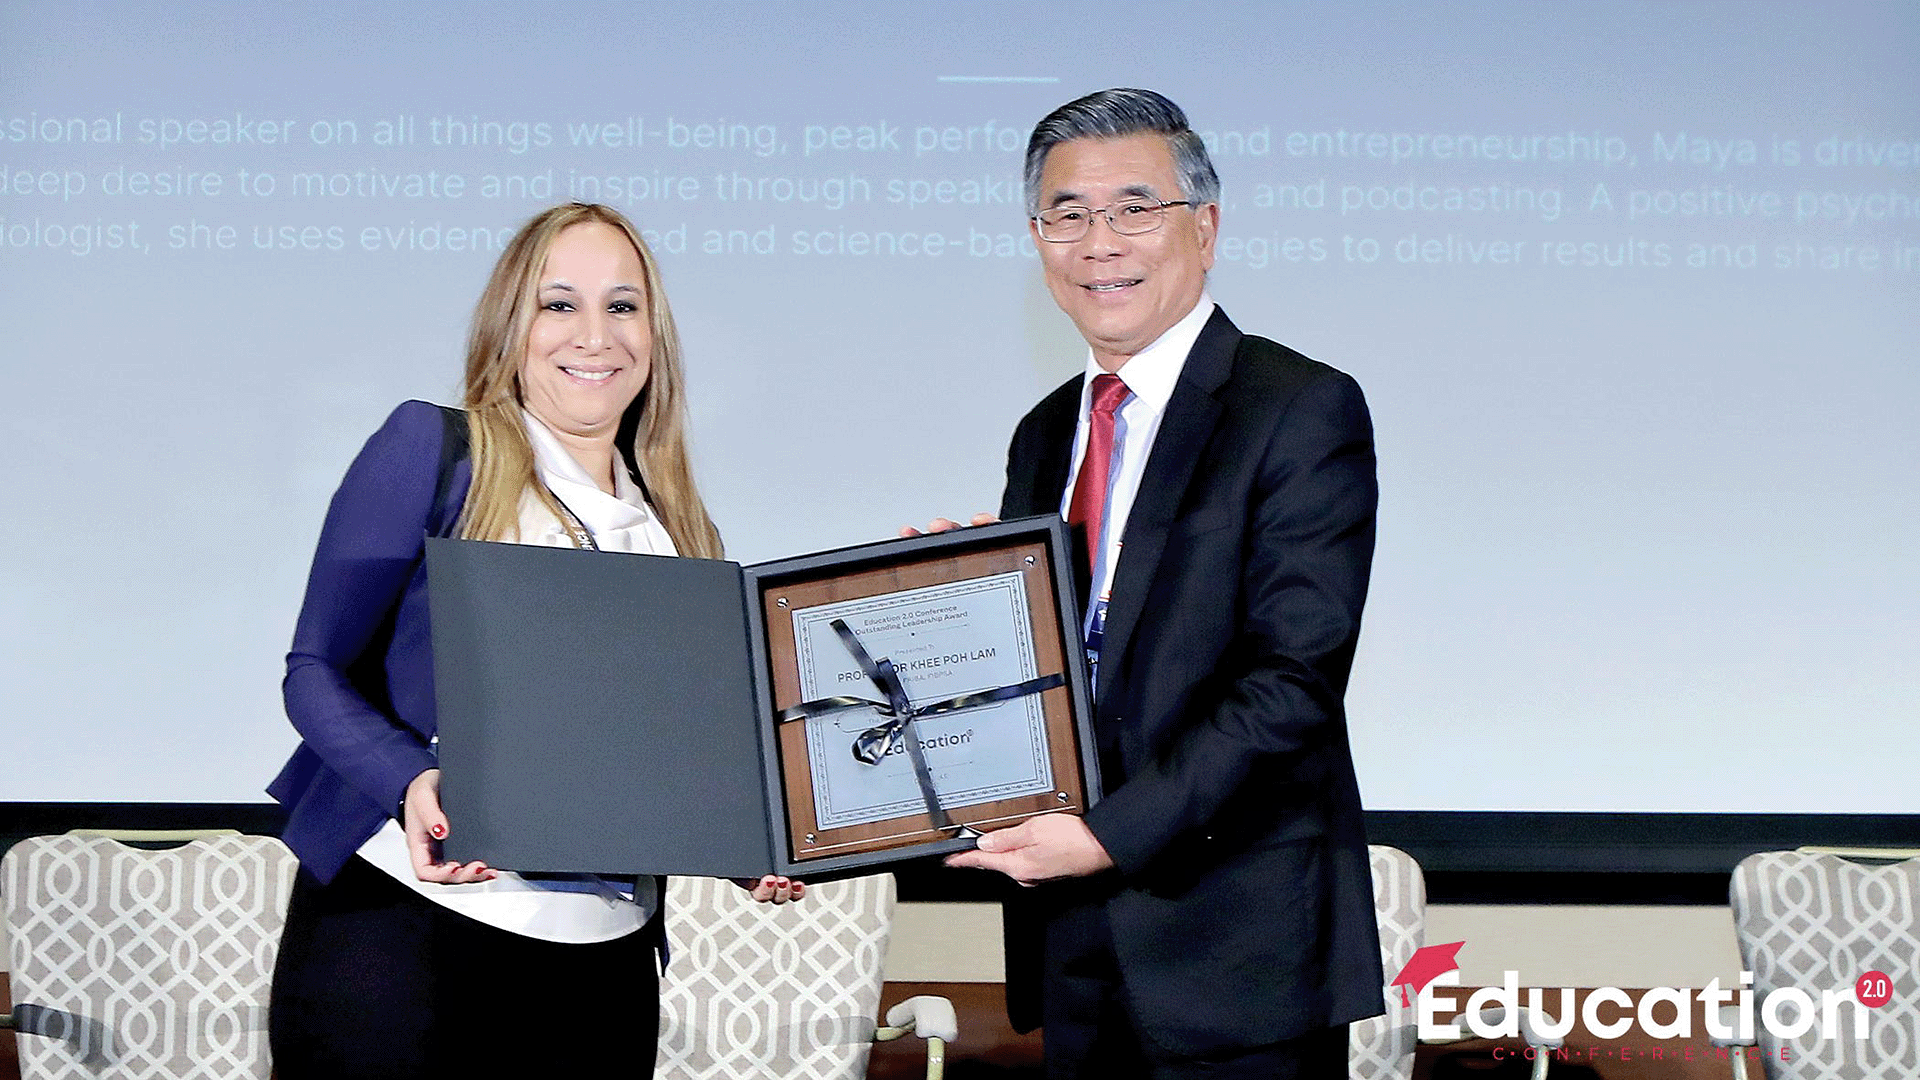 Professor Lam Khee Poh (right) was presented the award at the annual conference held in Dubai.